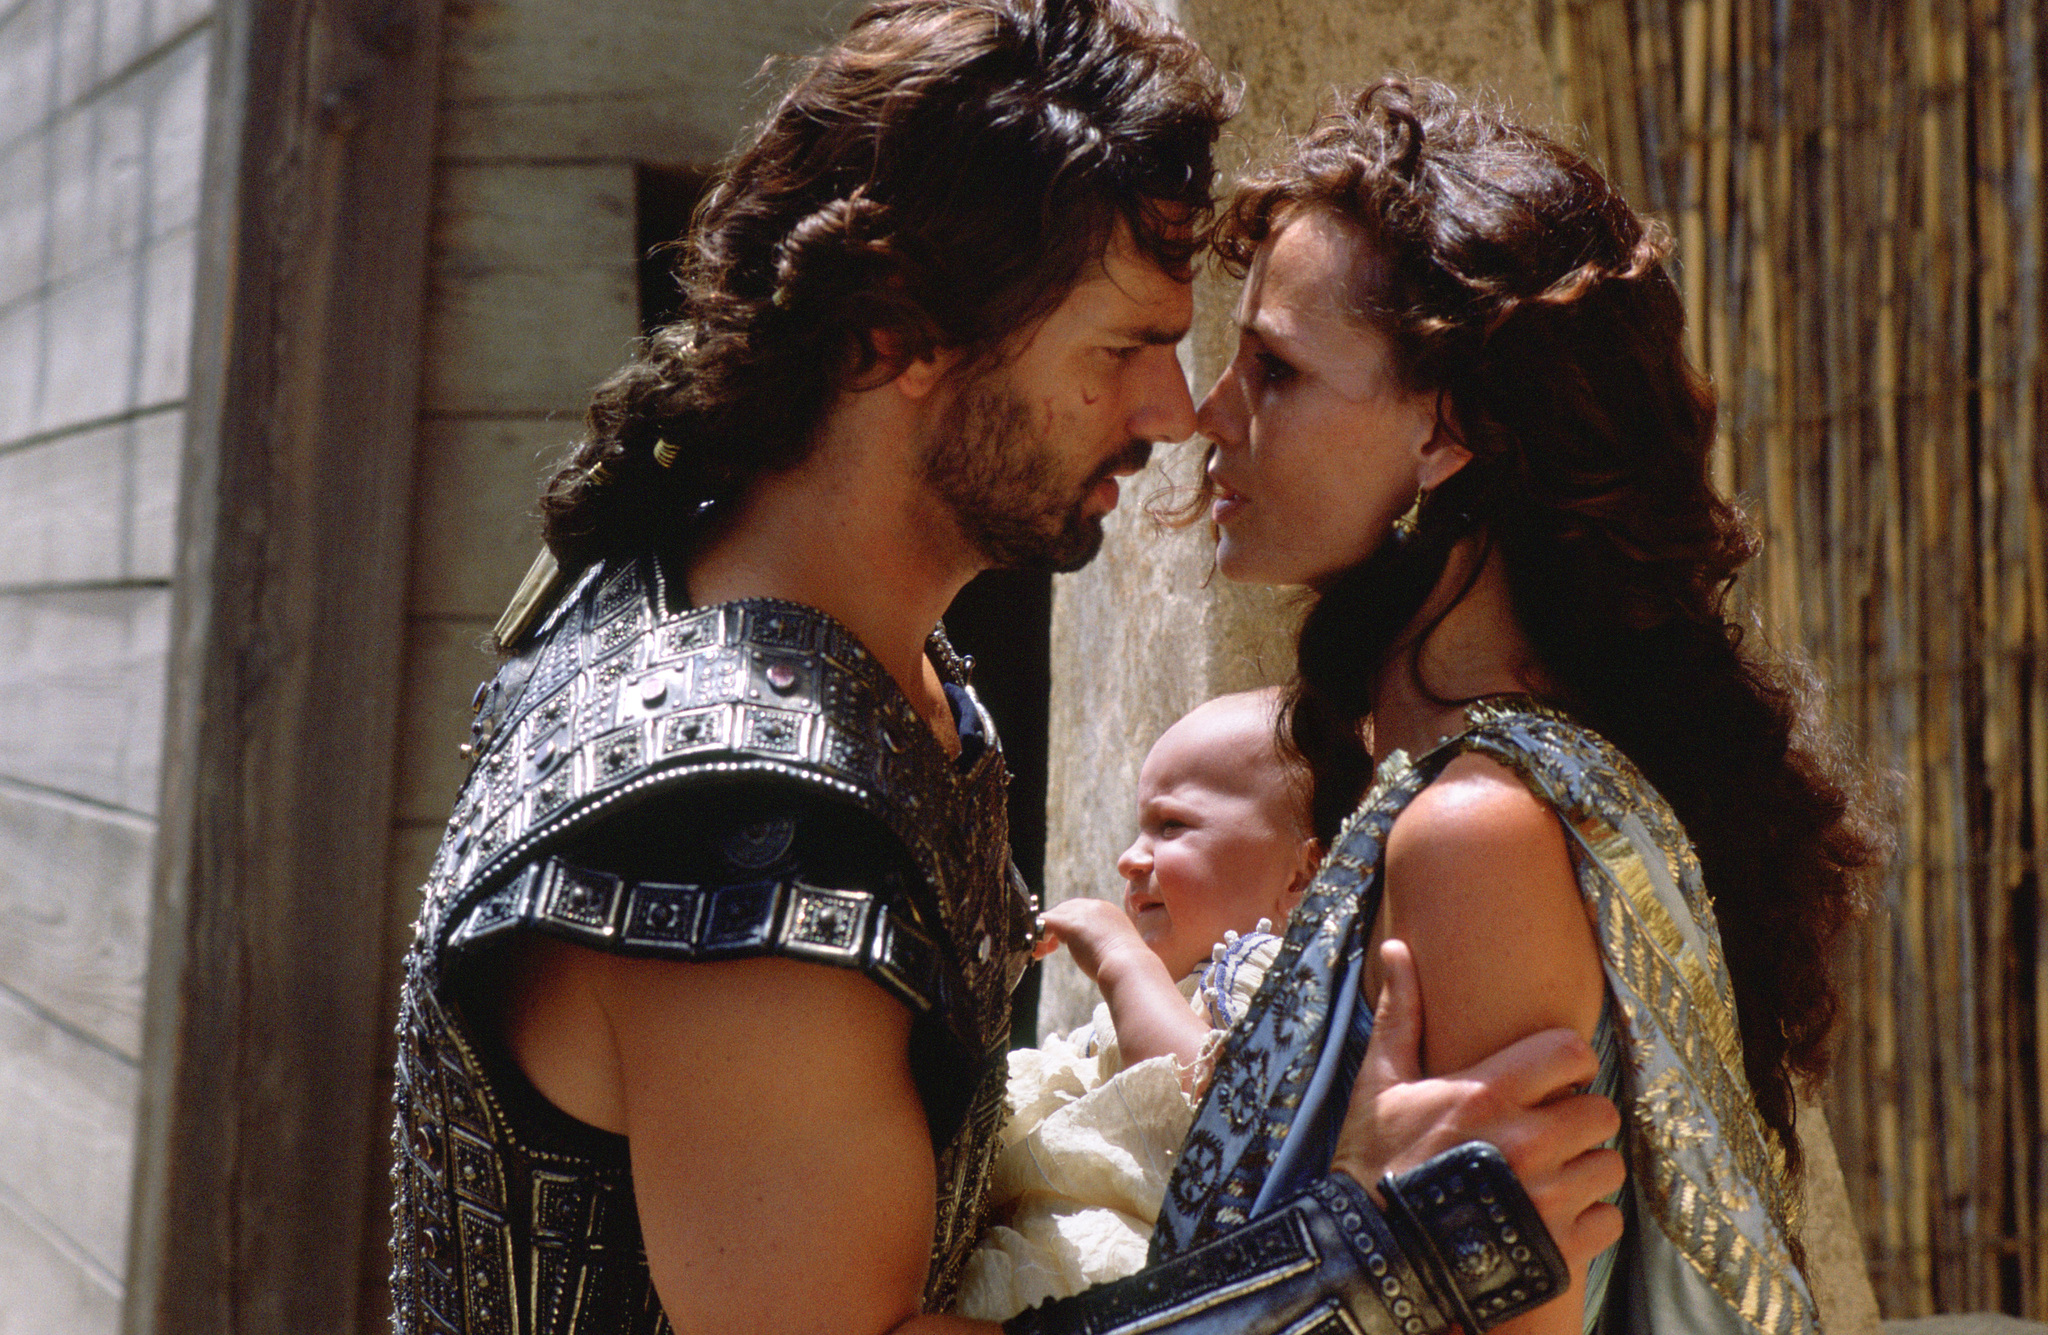 Still of Saffron Burrows and Eric Bana in Troy (2004)